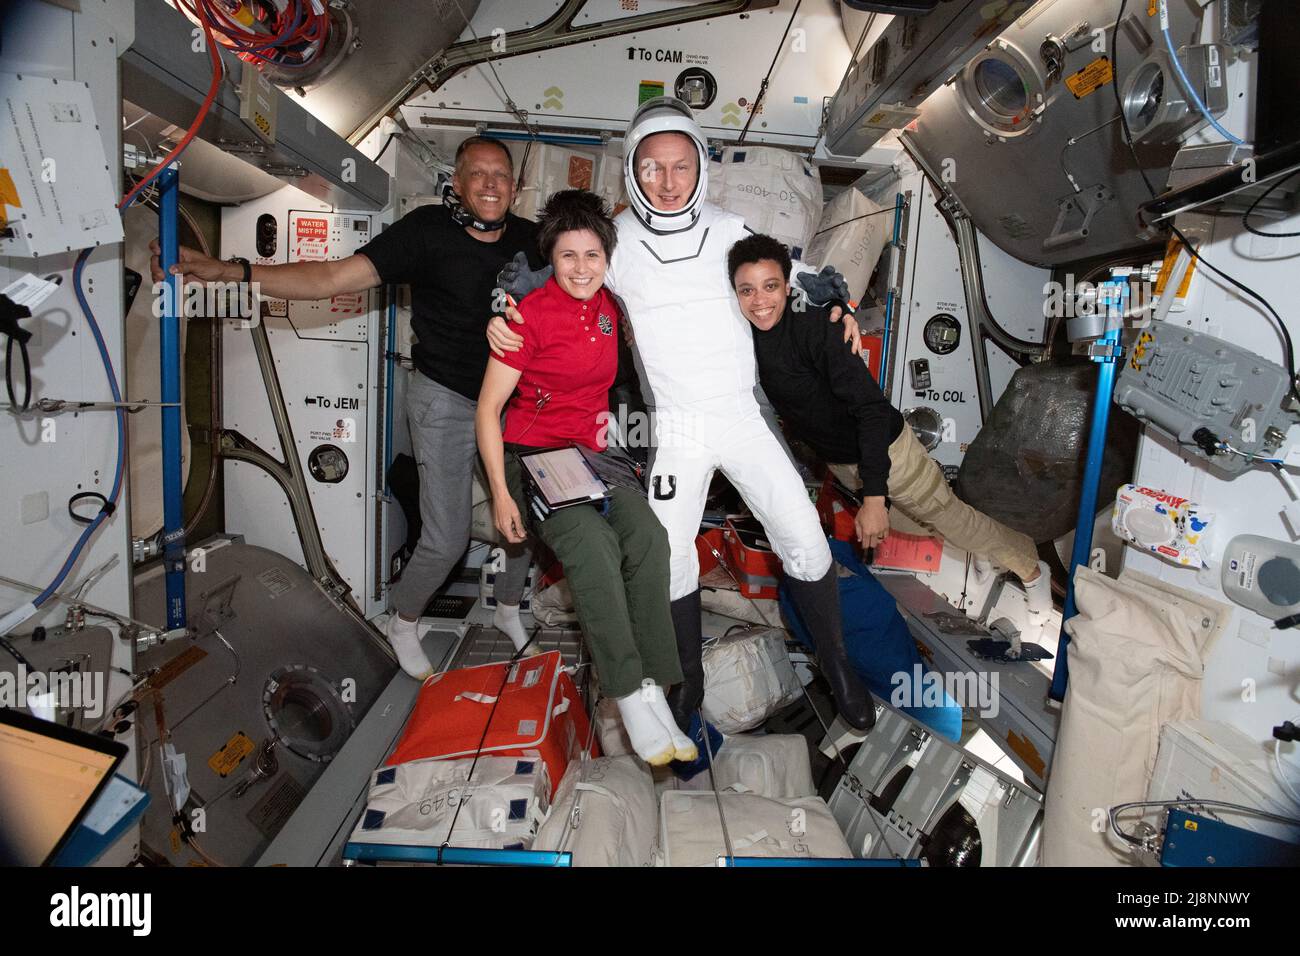 Earth Atmosphere. 4th May, 2022. ESA (European Space Agency) astronaut Matthias Maurer is pictured in his SpaceX flight suit before boarding the Dragon Endeavour crew ship and departing for Earth. He is posing with (from left) NASA astronaut Bob Hines, ESA (European Space Agency) astronaut Samantha Cristoforetti, and NASA astronaut Jessica Watkins. Credit: NASA/ZUMA Press Wire Service/ZUMAPRESS.com/Alamy Live News Stock Photo